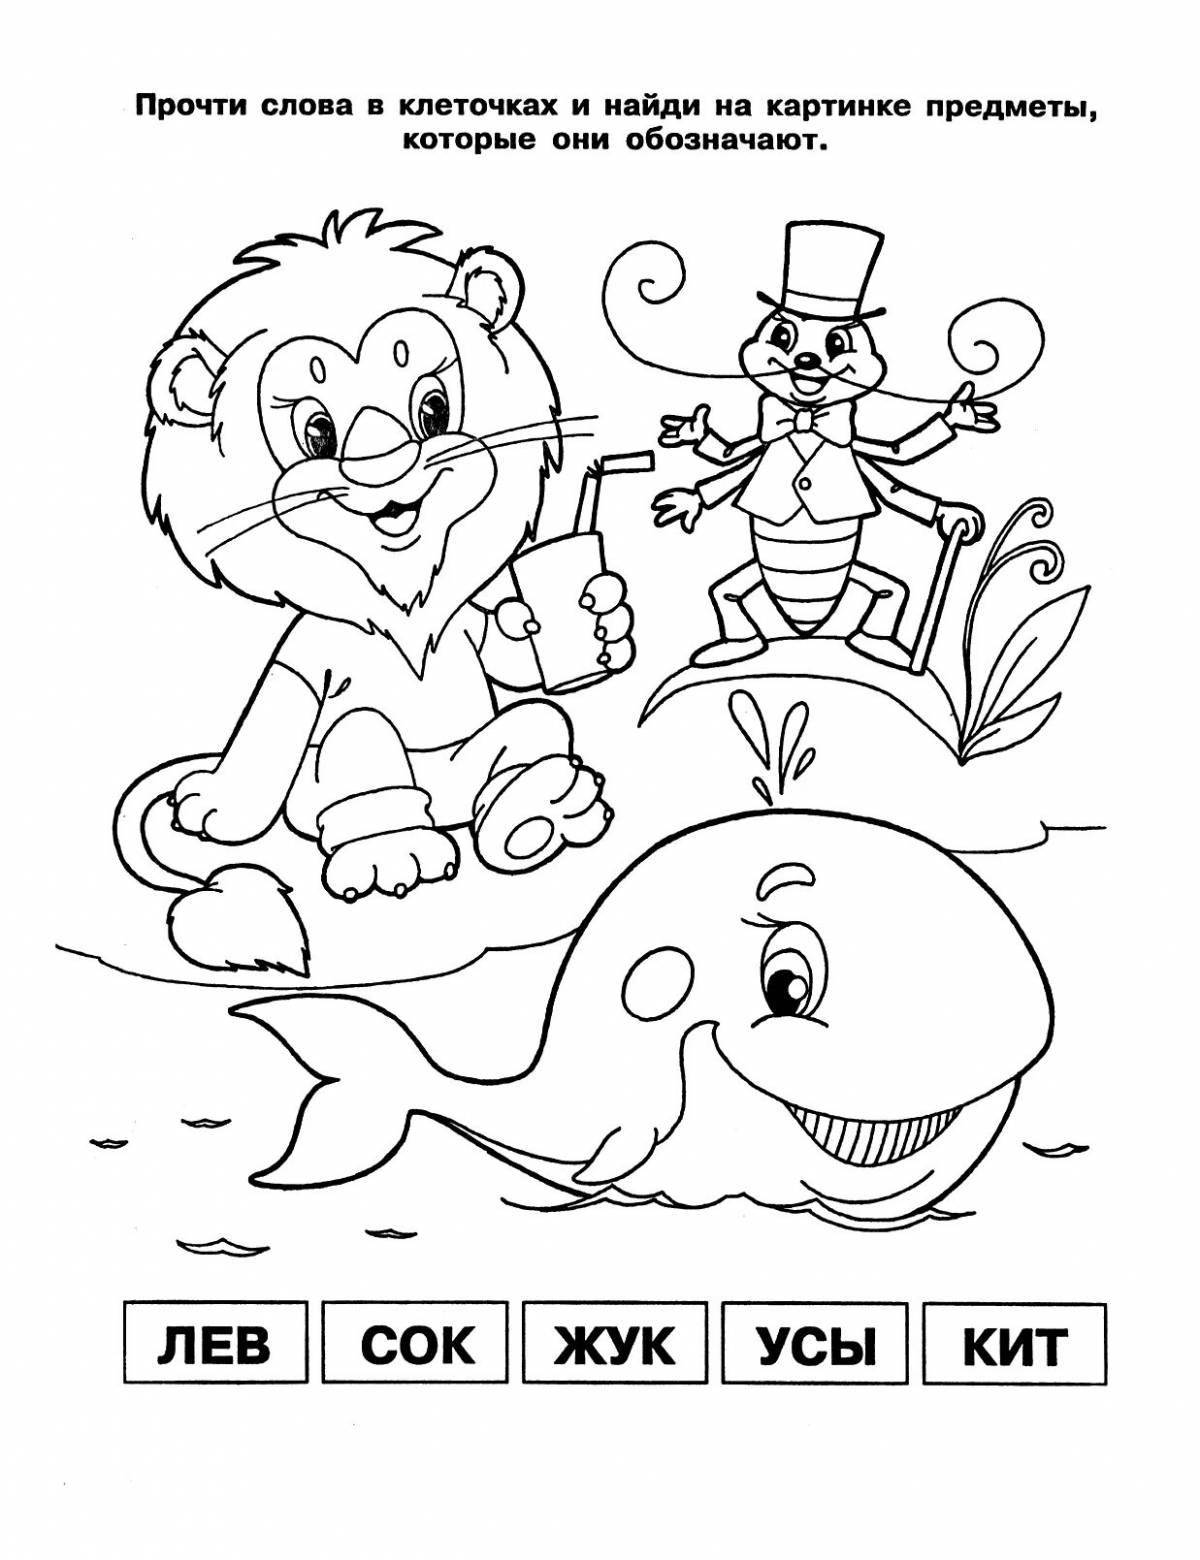 Colorful syllables coloring book for kids